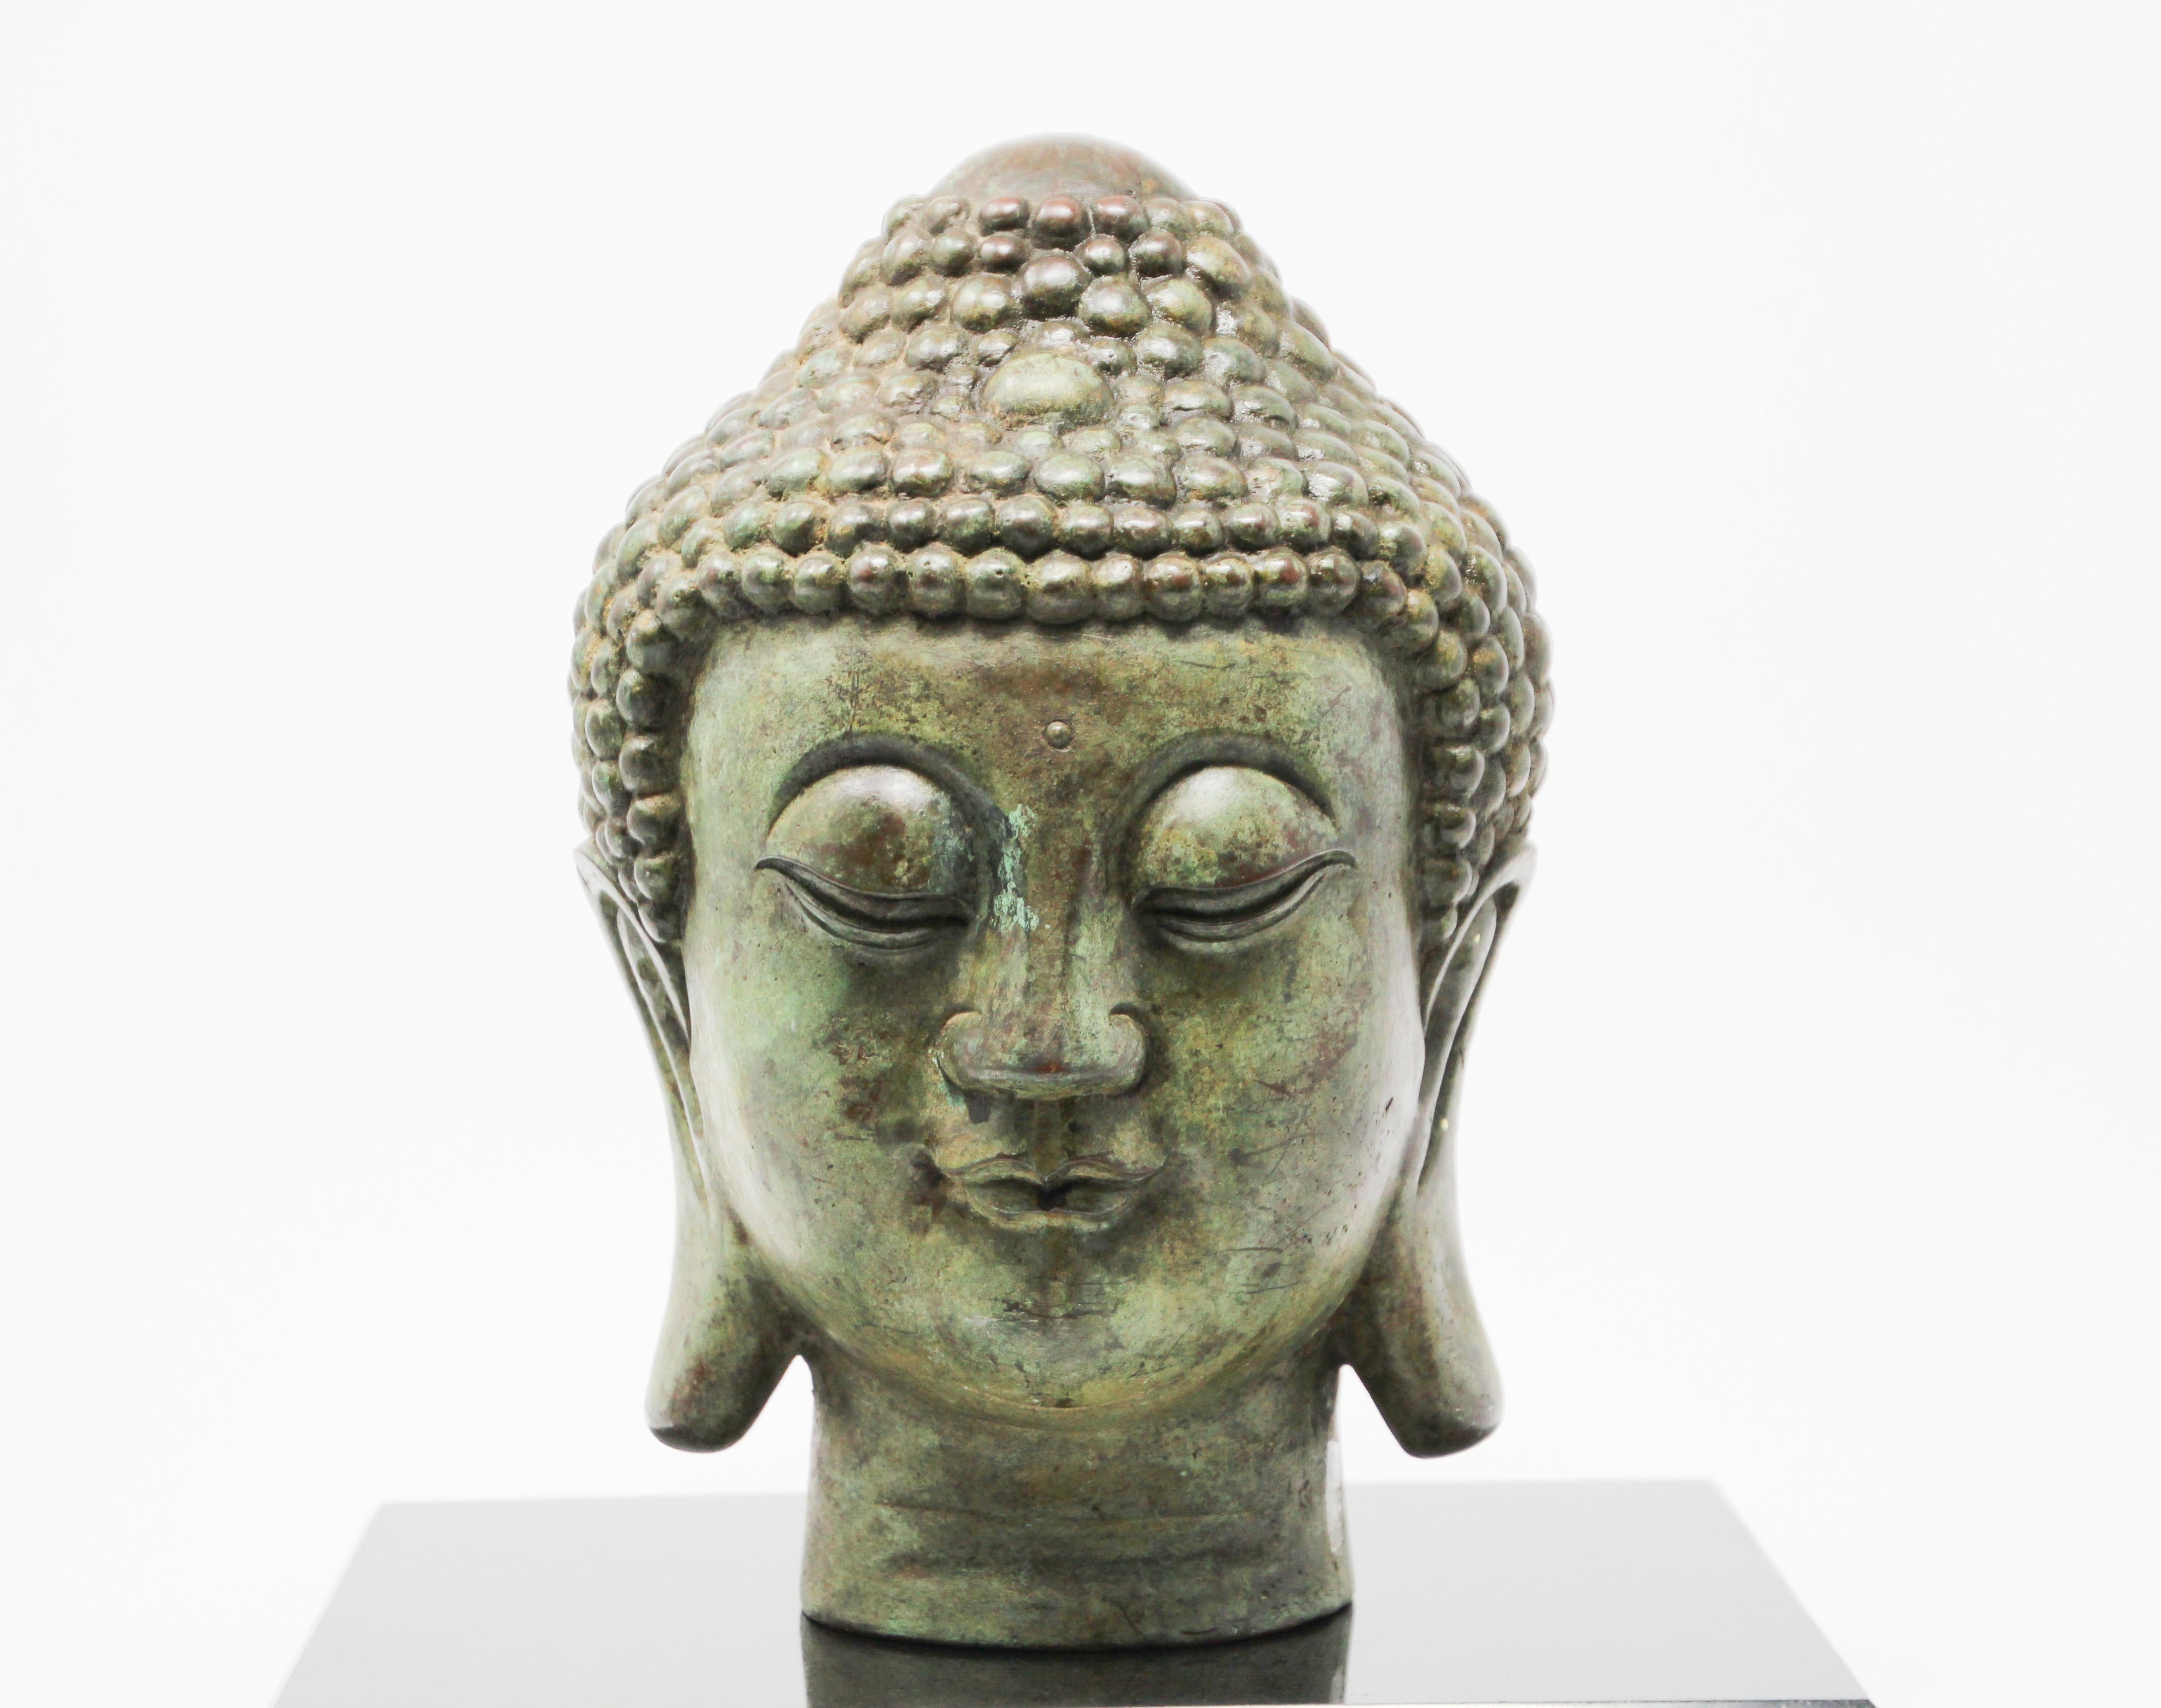 Bronze Buddha head sculpture on marble stand.
Buddha head with eyes lowered in meditation, serene and calm, representing the enlightened Buddha.
Finely modeled with incised chin, bow-shaped mouth, elongated eyes and gently arching brows, flanked